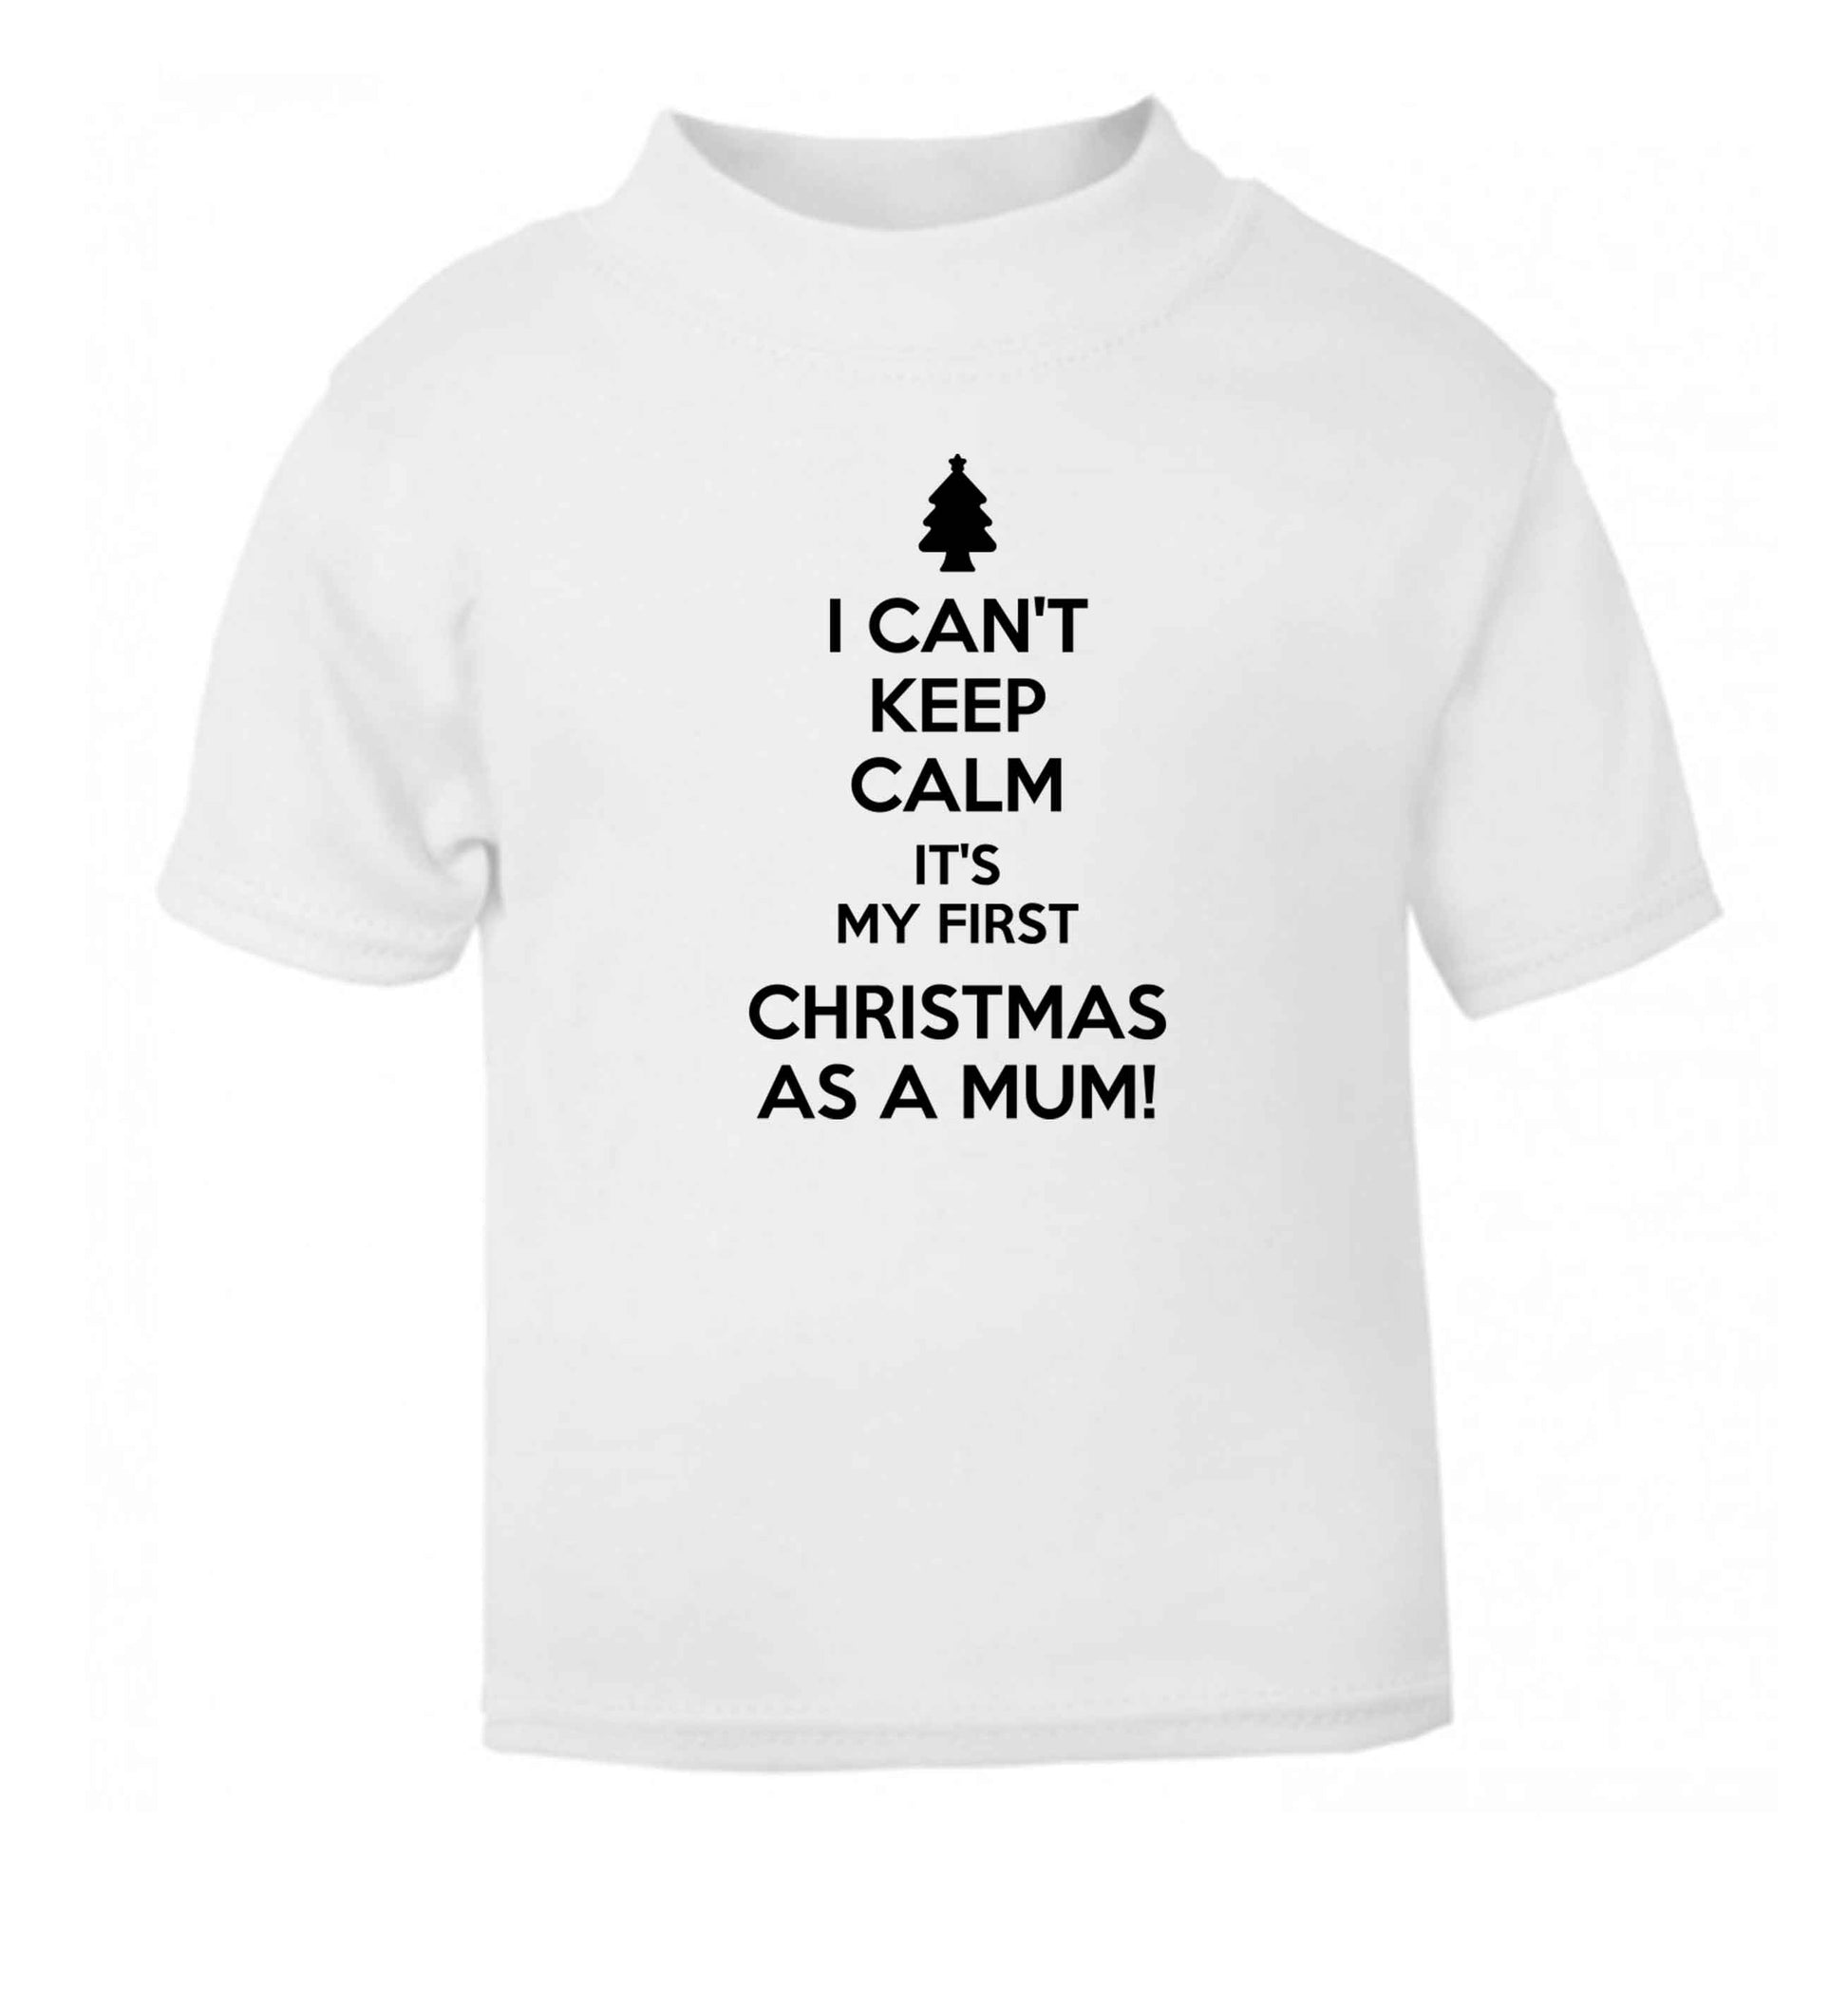 I can't keep calm it's my first Christmas as a mum white Baby Toddler Tshirt 2 Years